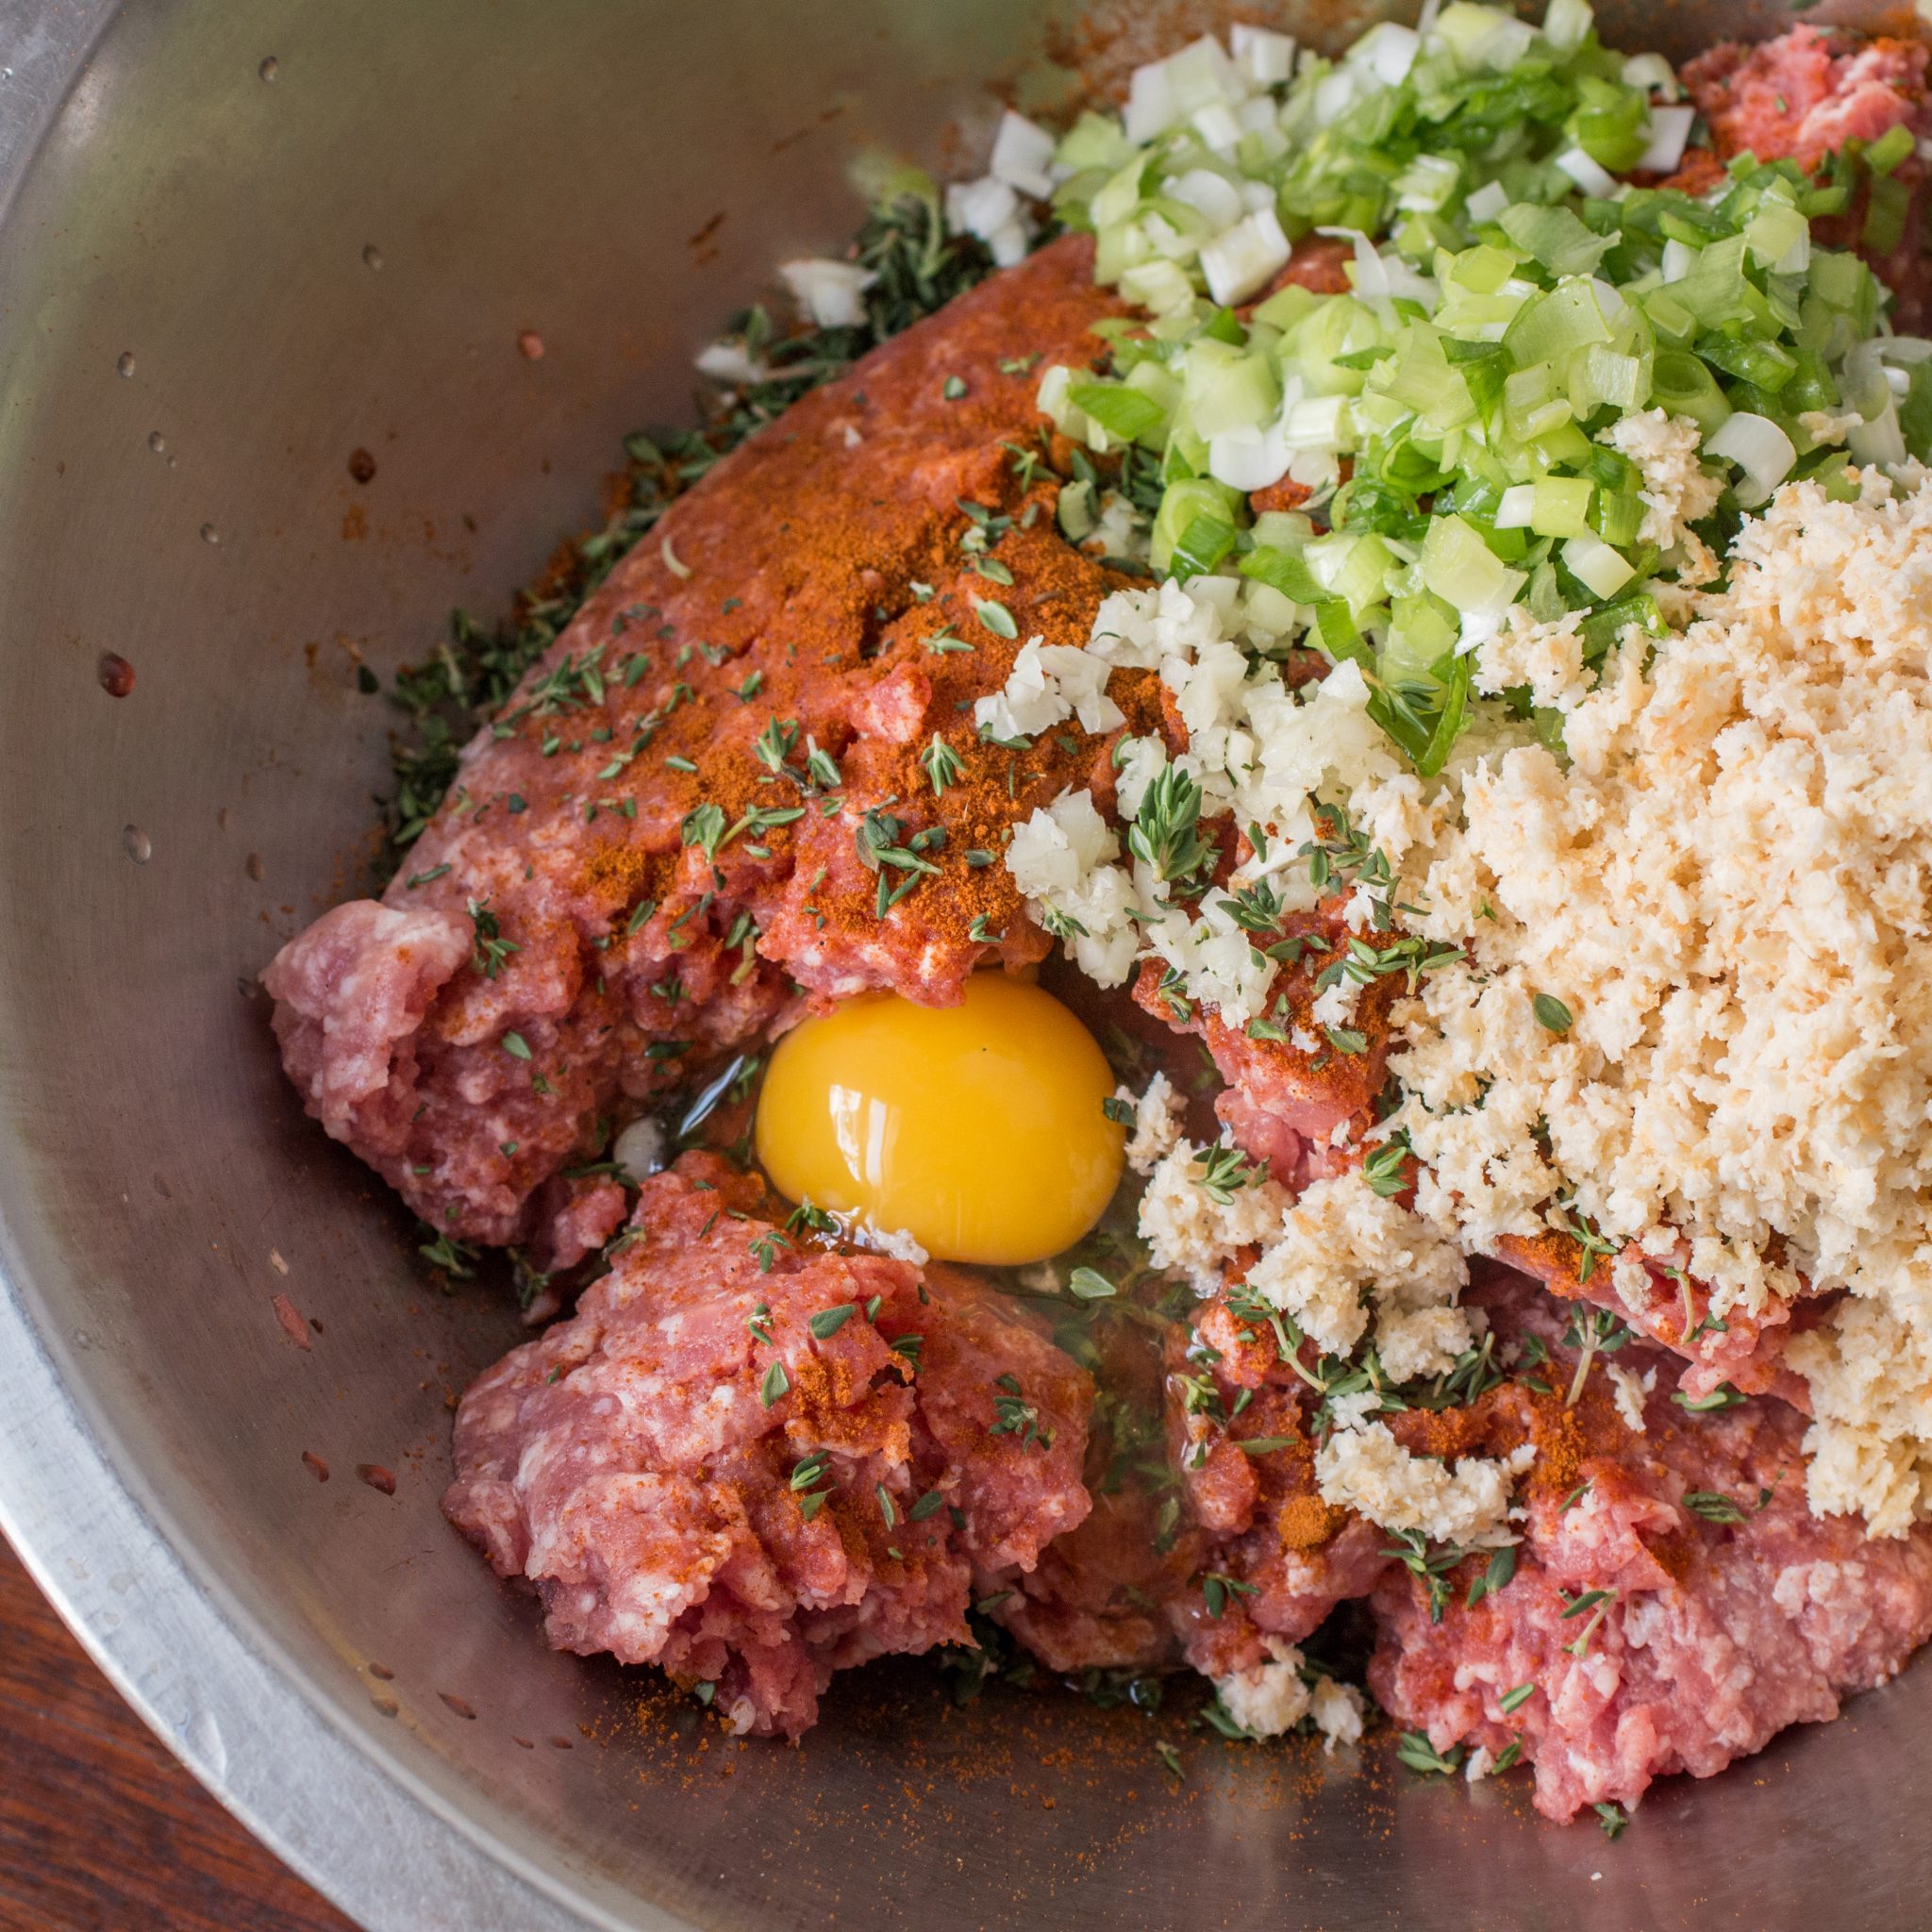 Mixing eggs and breadcrumbs into lamb meatloaf mixture in a bowl.